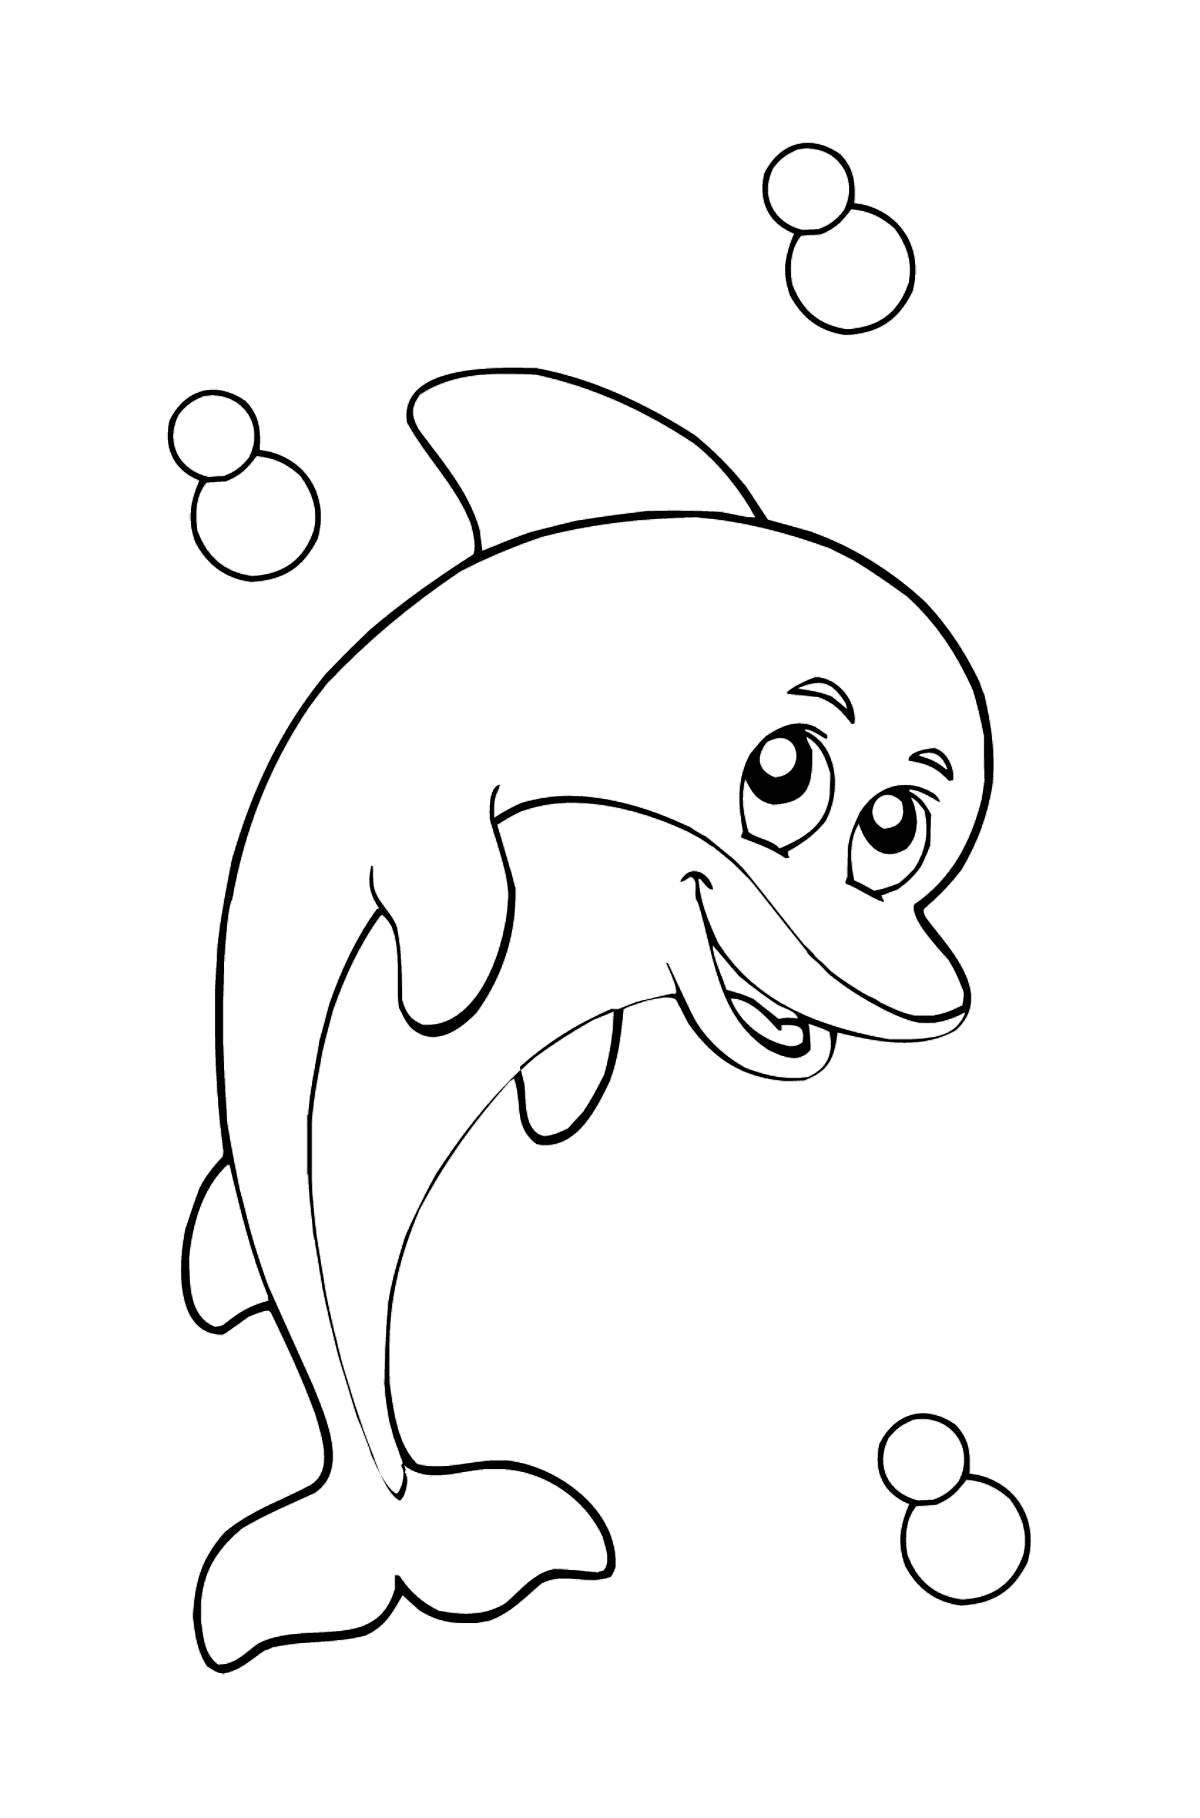 Coloring page with a Cartoon dolphin - Coloring Pages for Kids